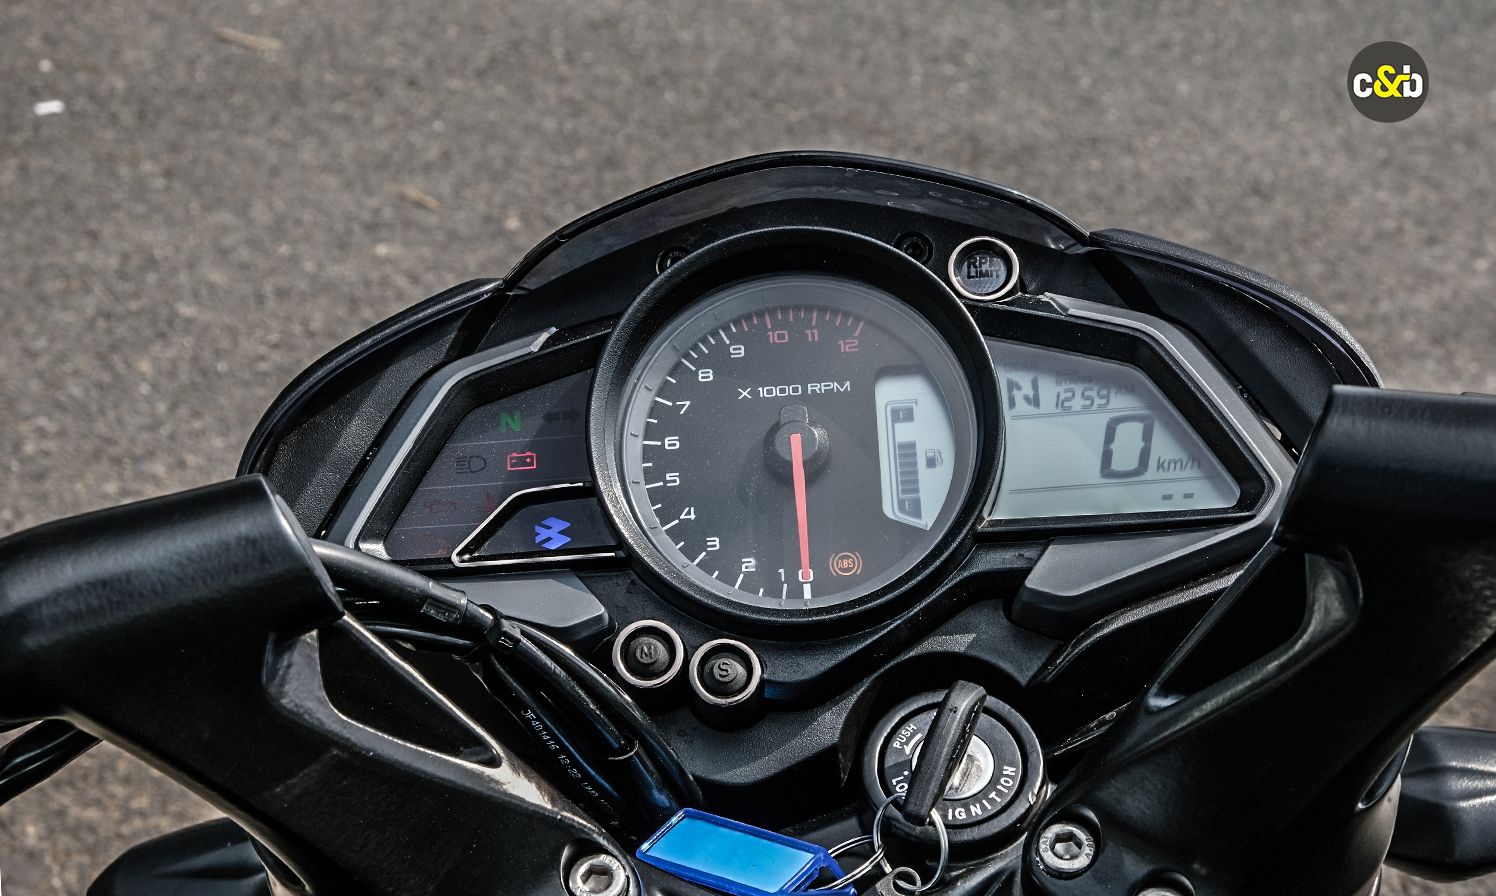 Updated Instrument Cluster on the NS200 and NS160. Photo: carandbike.com 